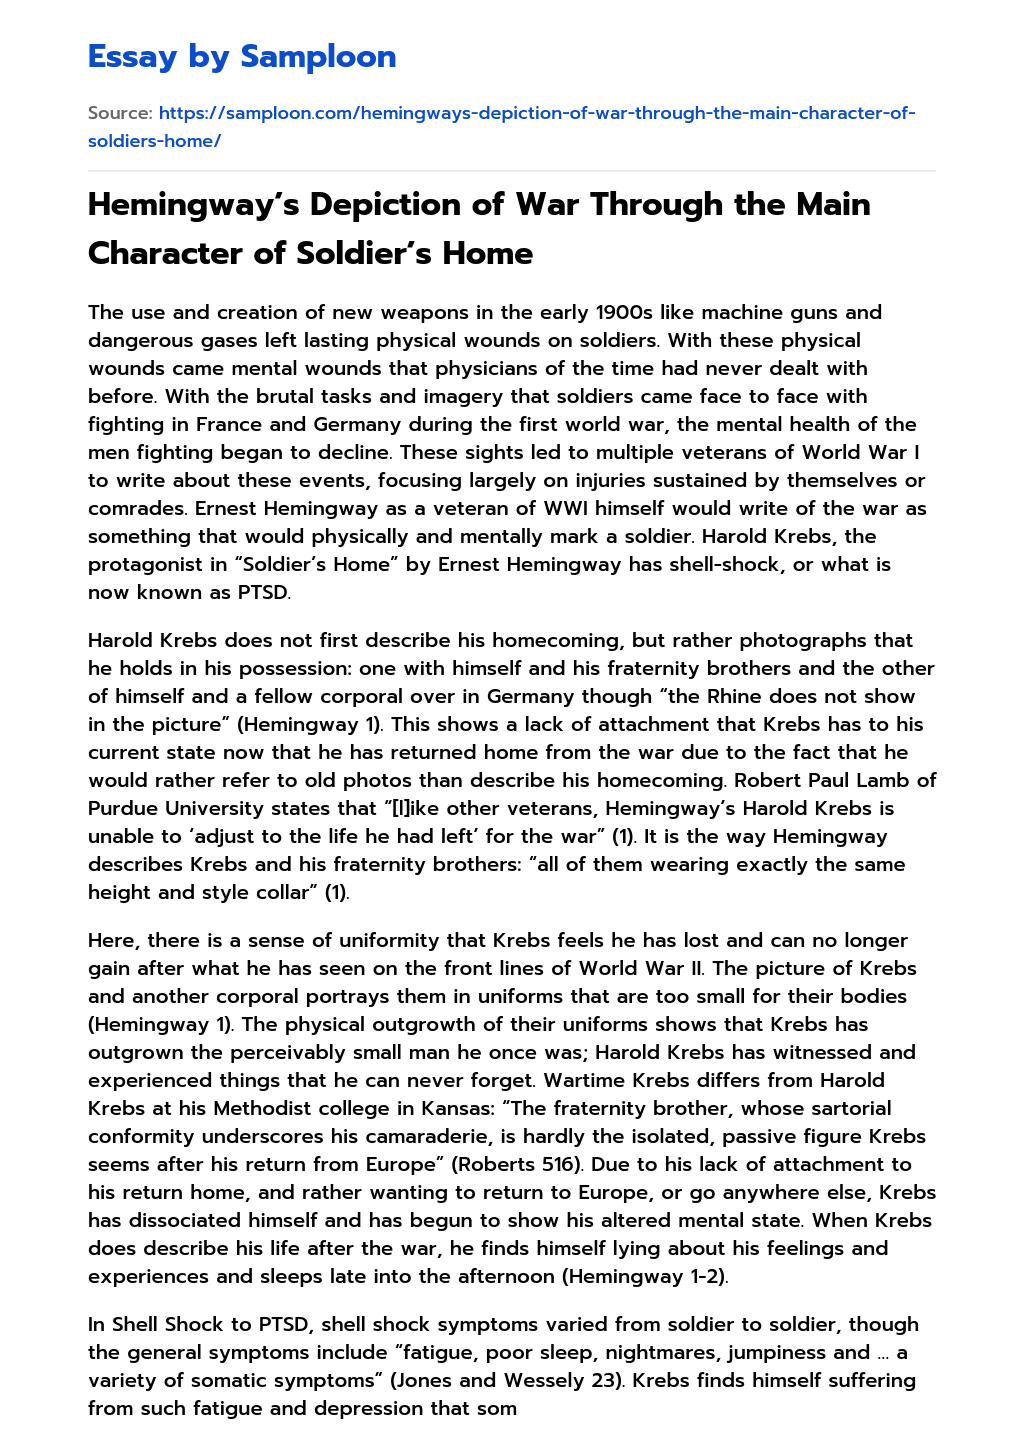 Hemingway’s Depiction of War Through the Main Character of Soldier’s Home essay